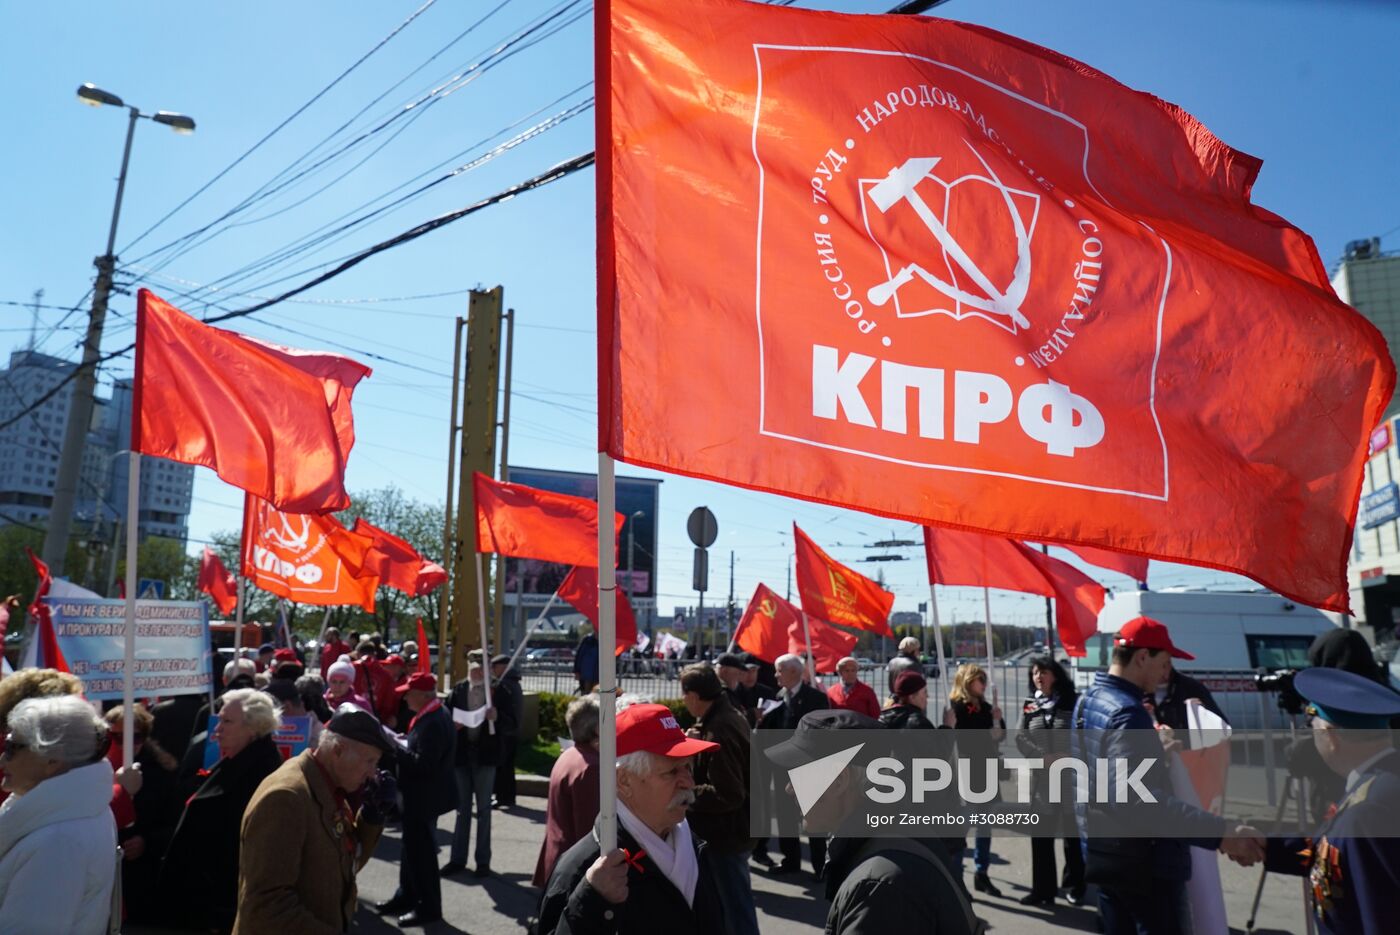 May Day celebrations in Russian cities